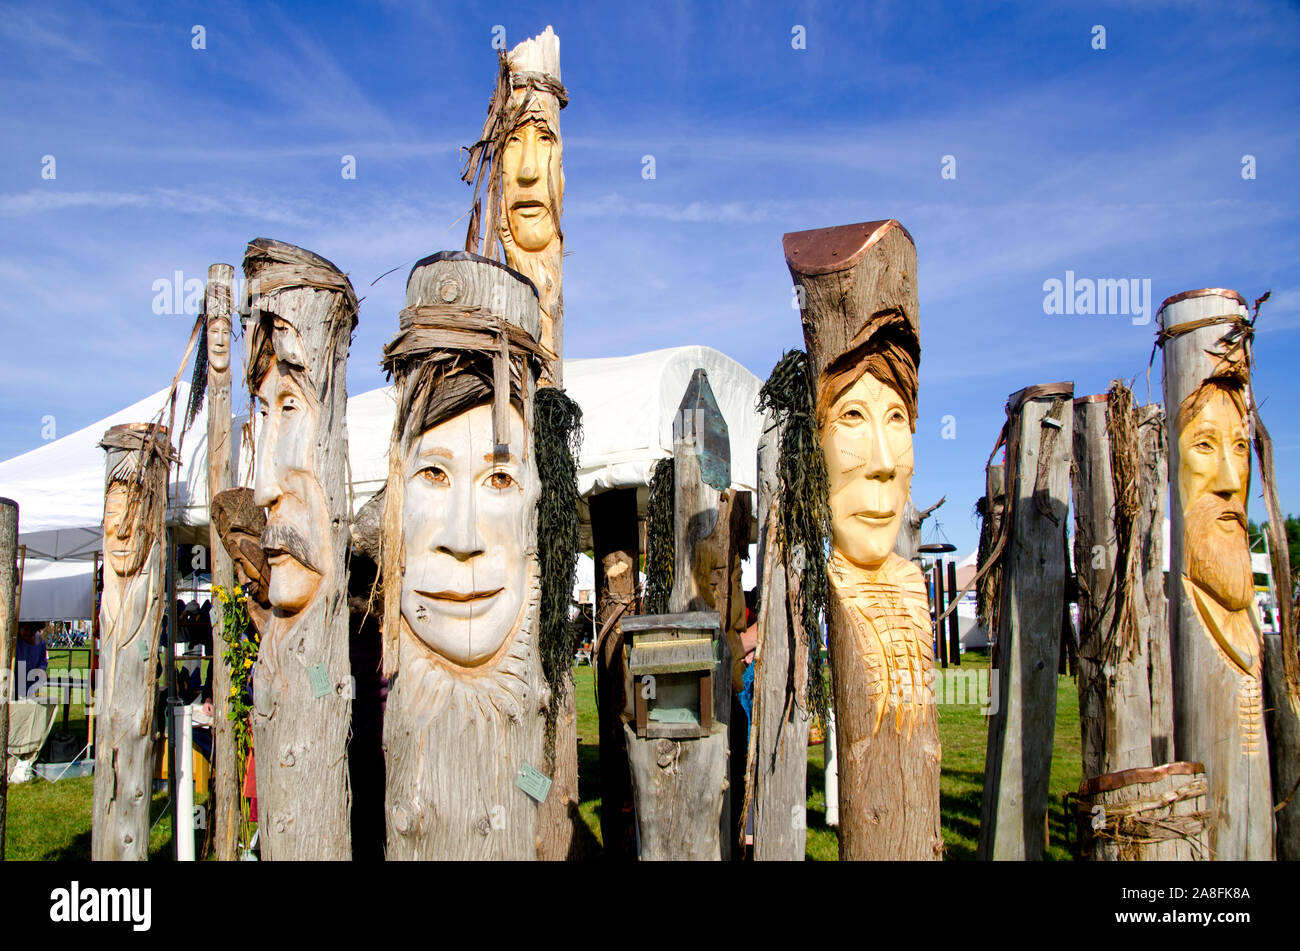 Faces carved in trees at Common ground fair, Unity Maine Stock Photo